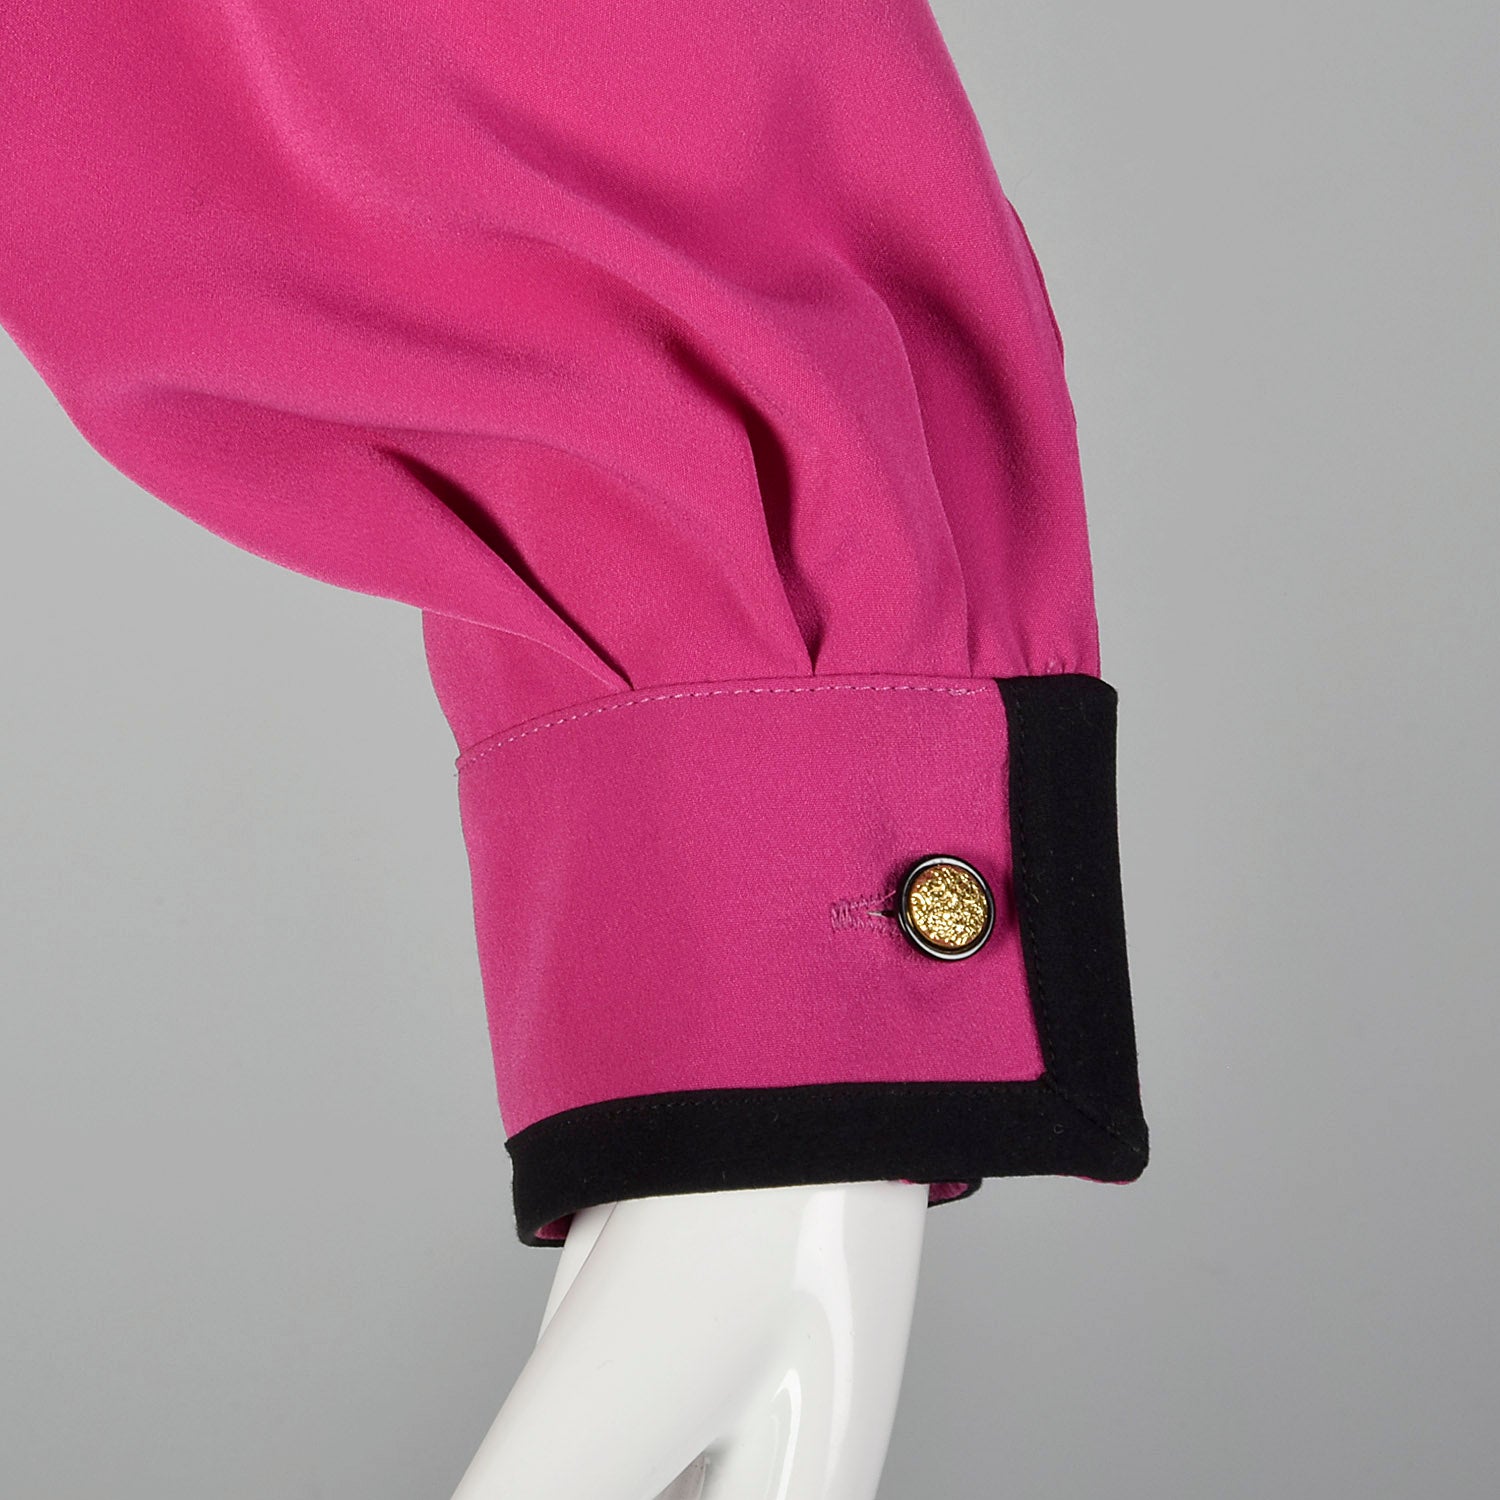 Small 1980s Magenta Jaeger Blouse